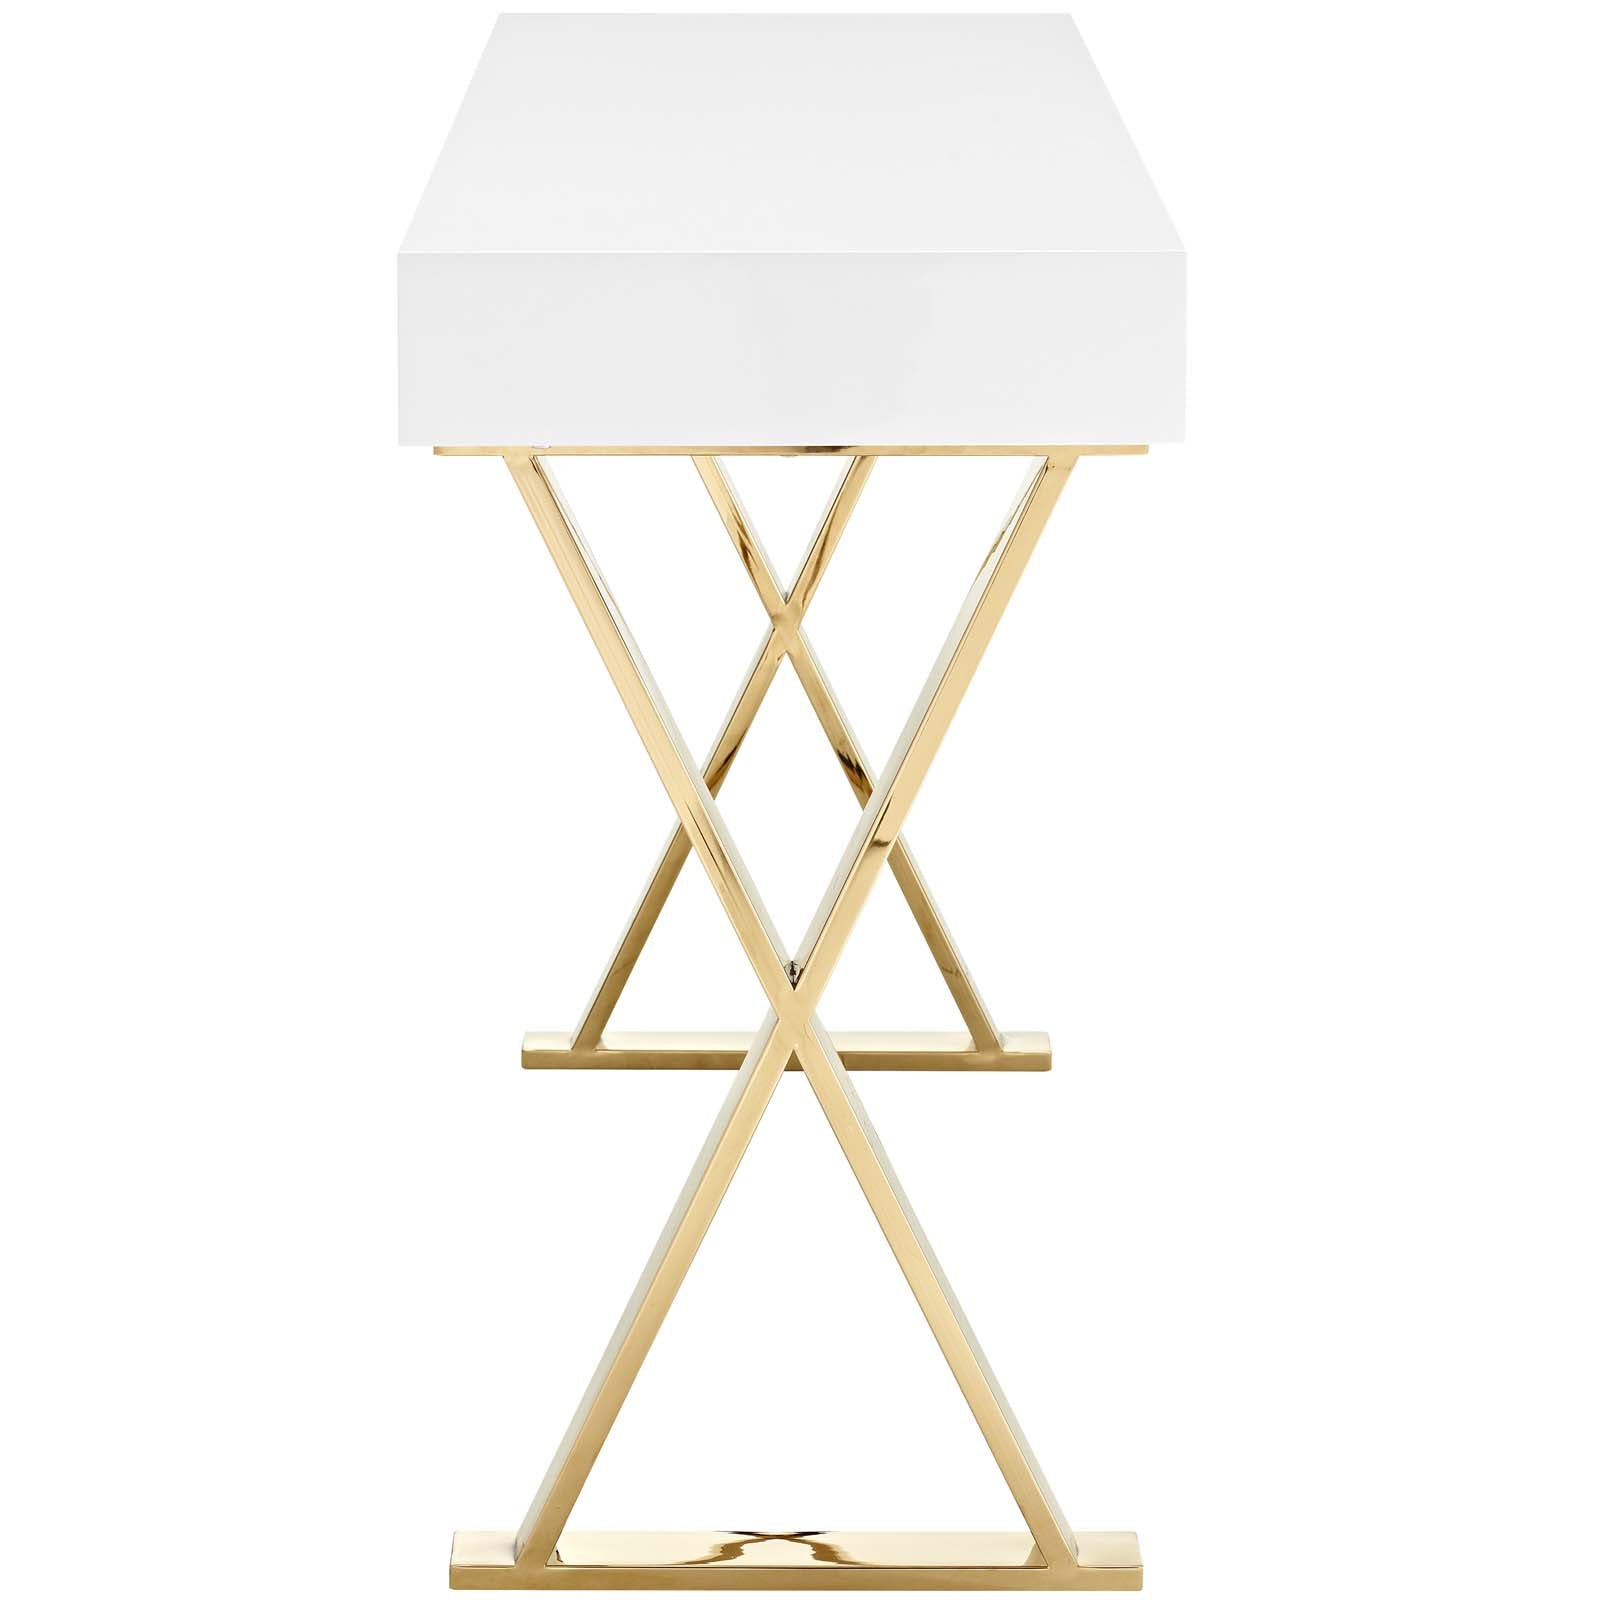 Sector Console Table - East Shore Modern Home Furnishings